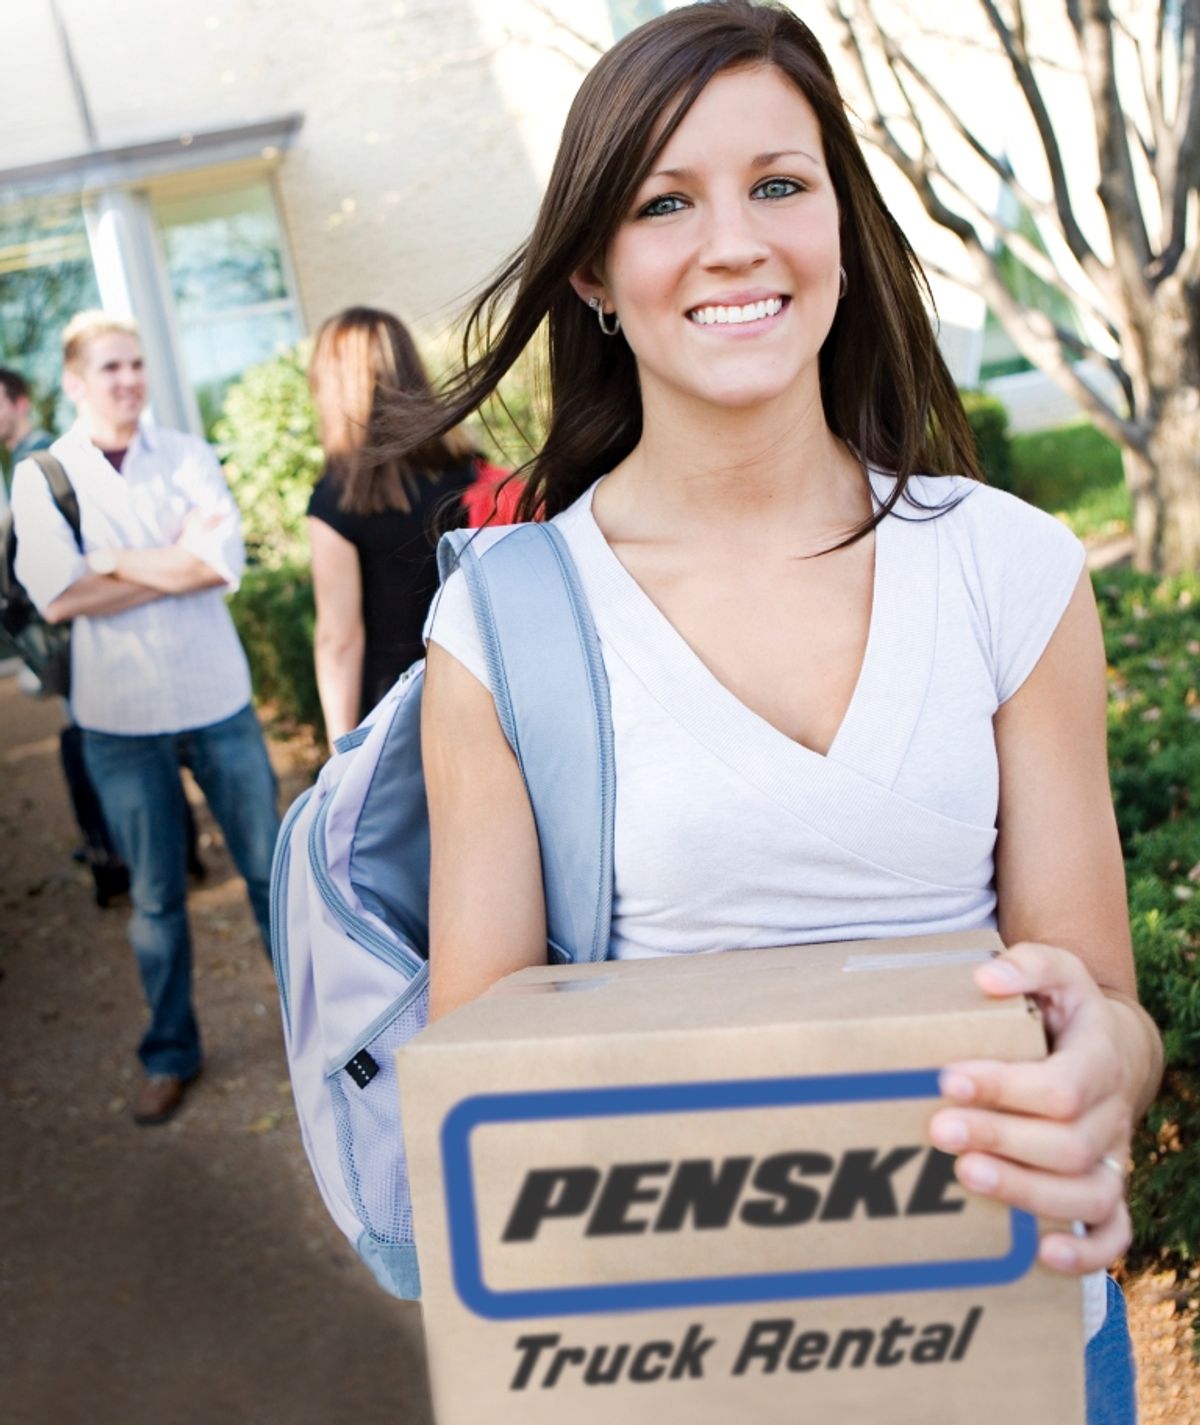 Quick Tips for College Moves